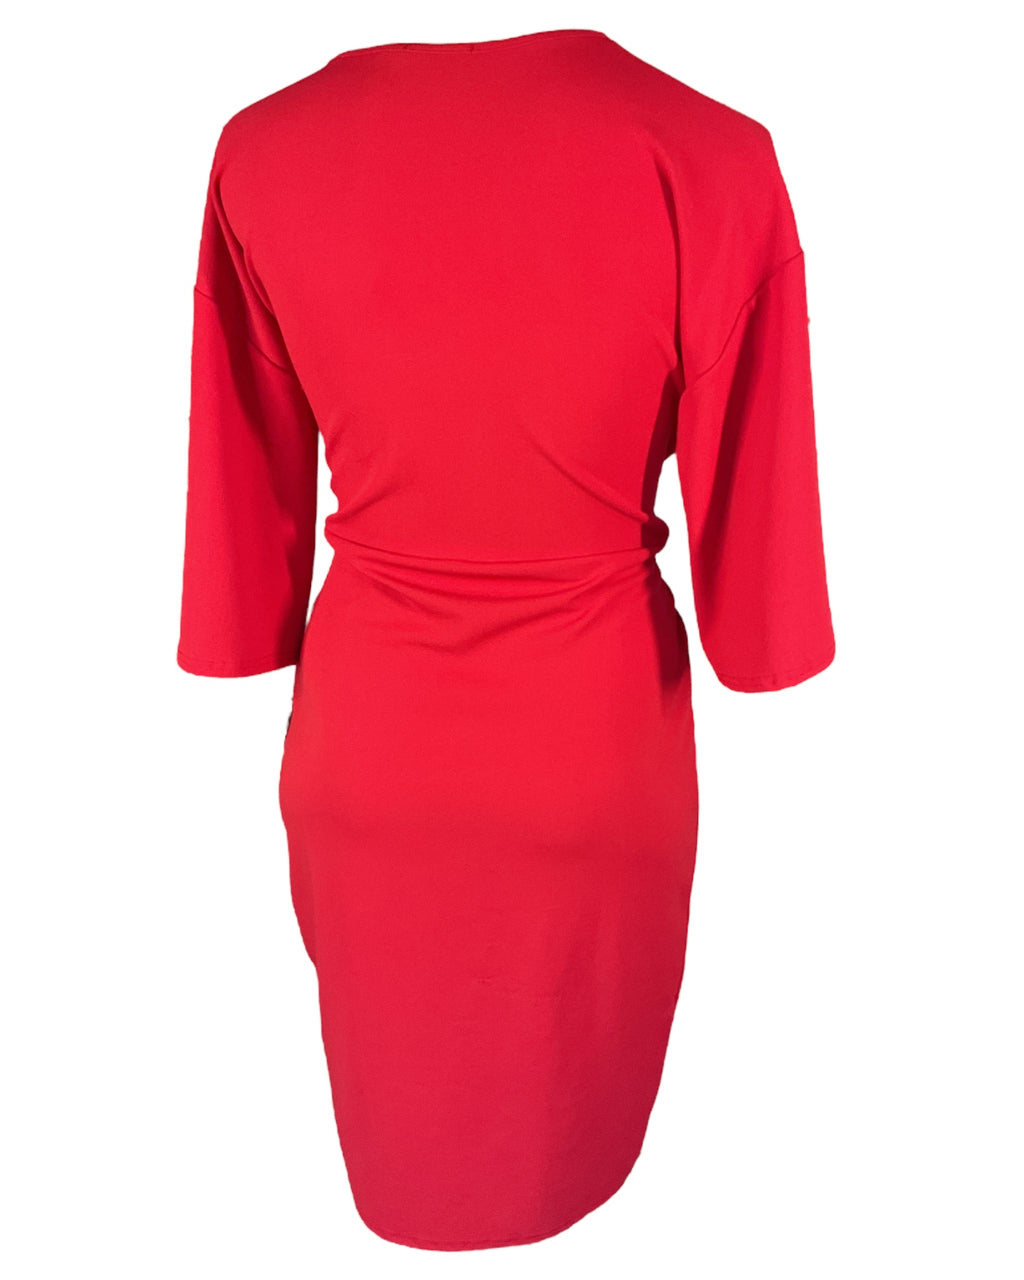 Red Boohoo Cocktail Dress, 16